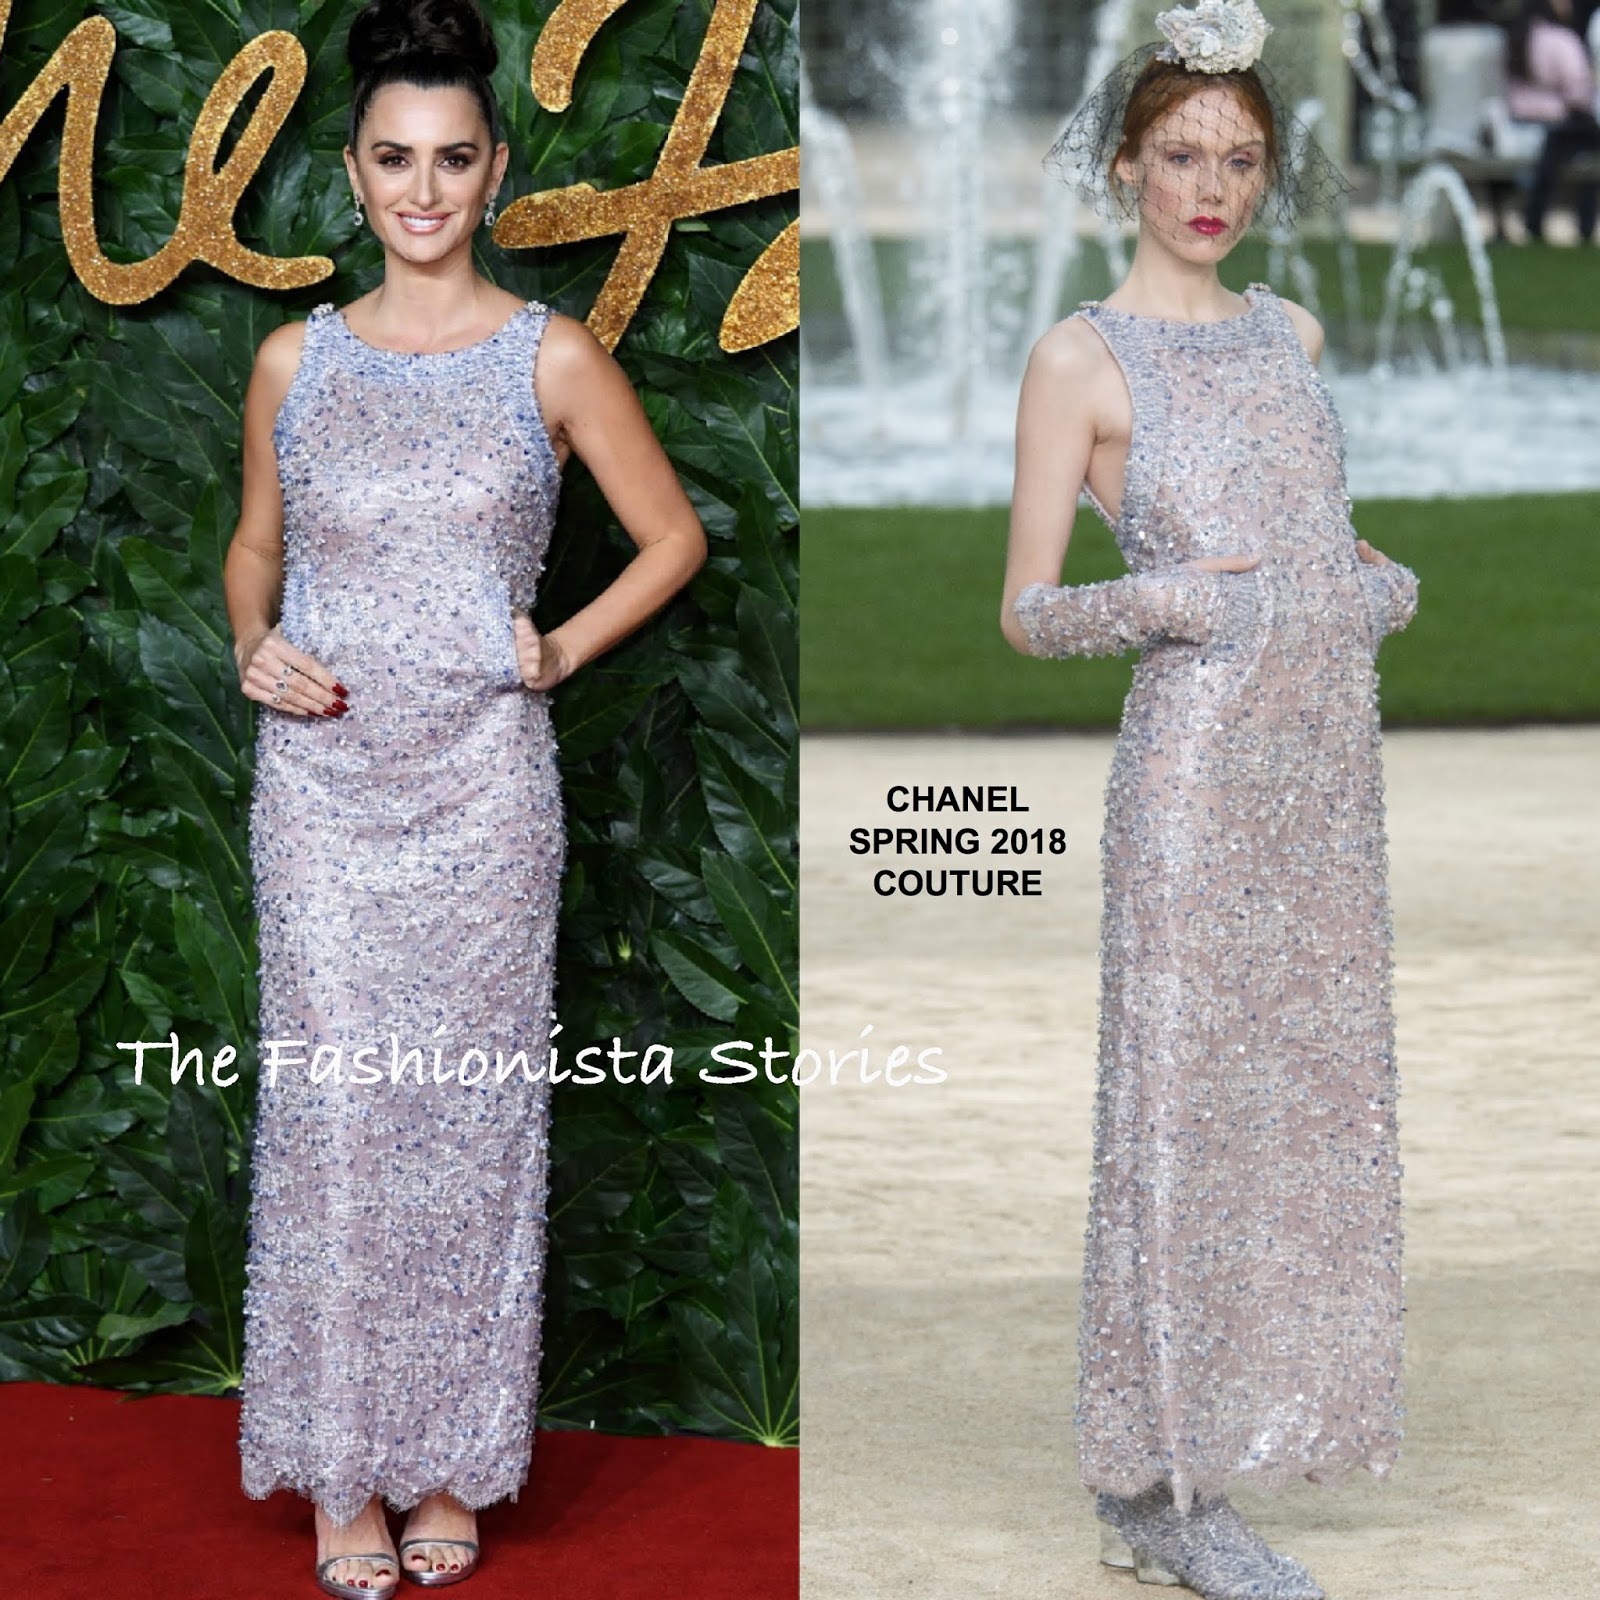 Penelope Cruz in Chanel Couture at the 2018 Fashion Awards